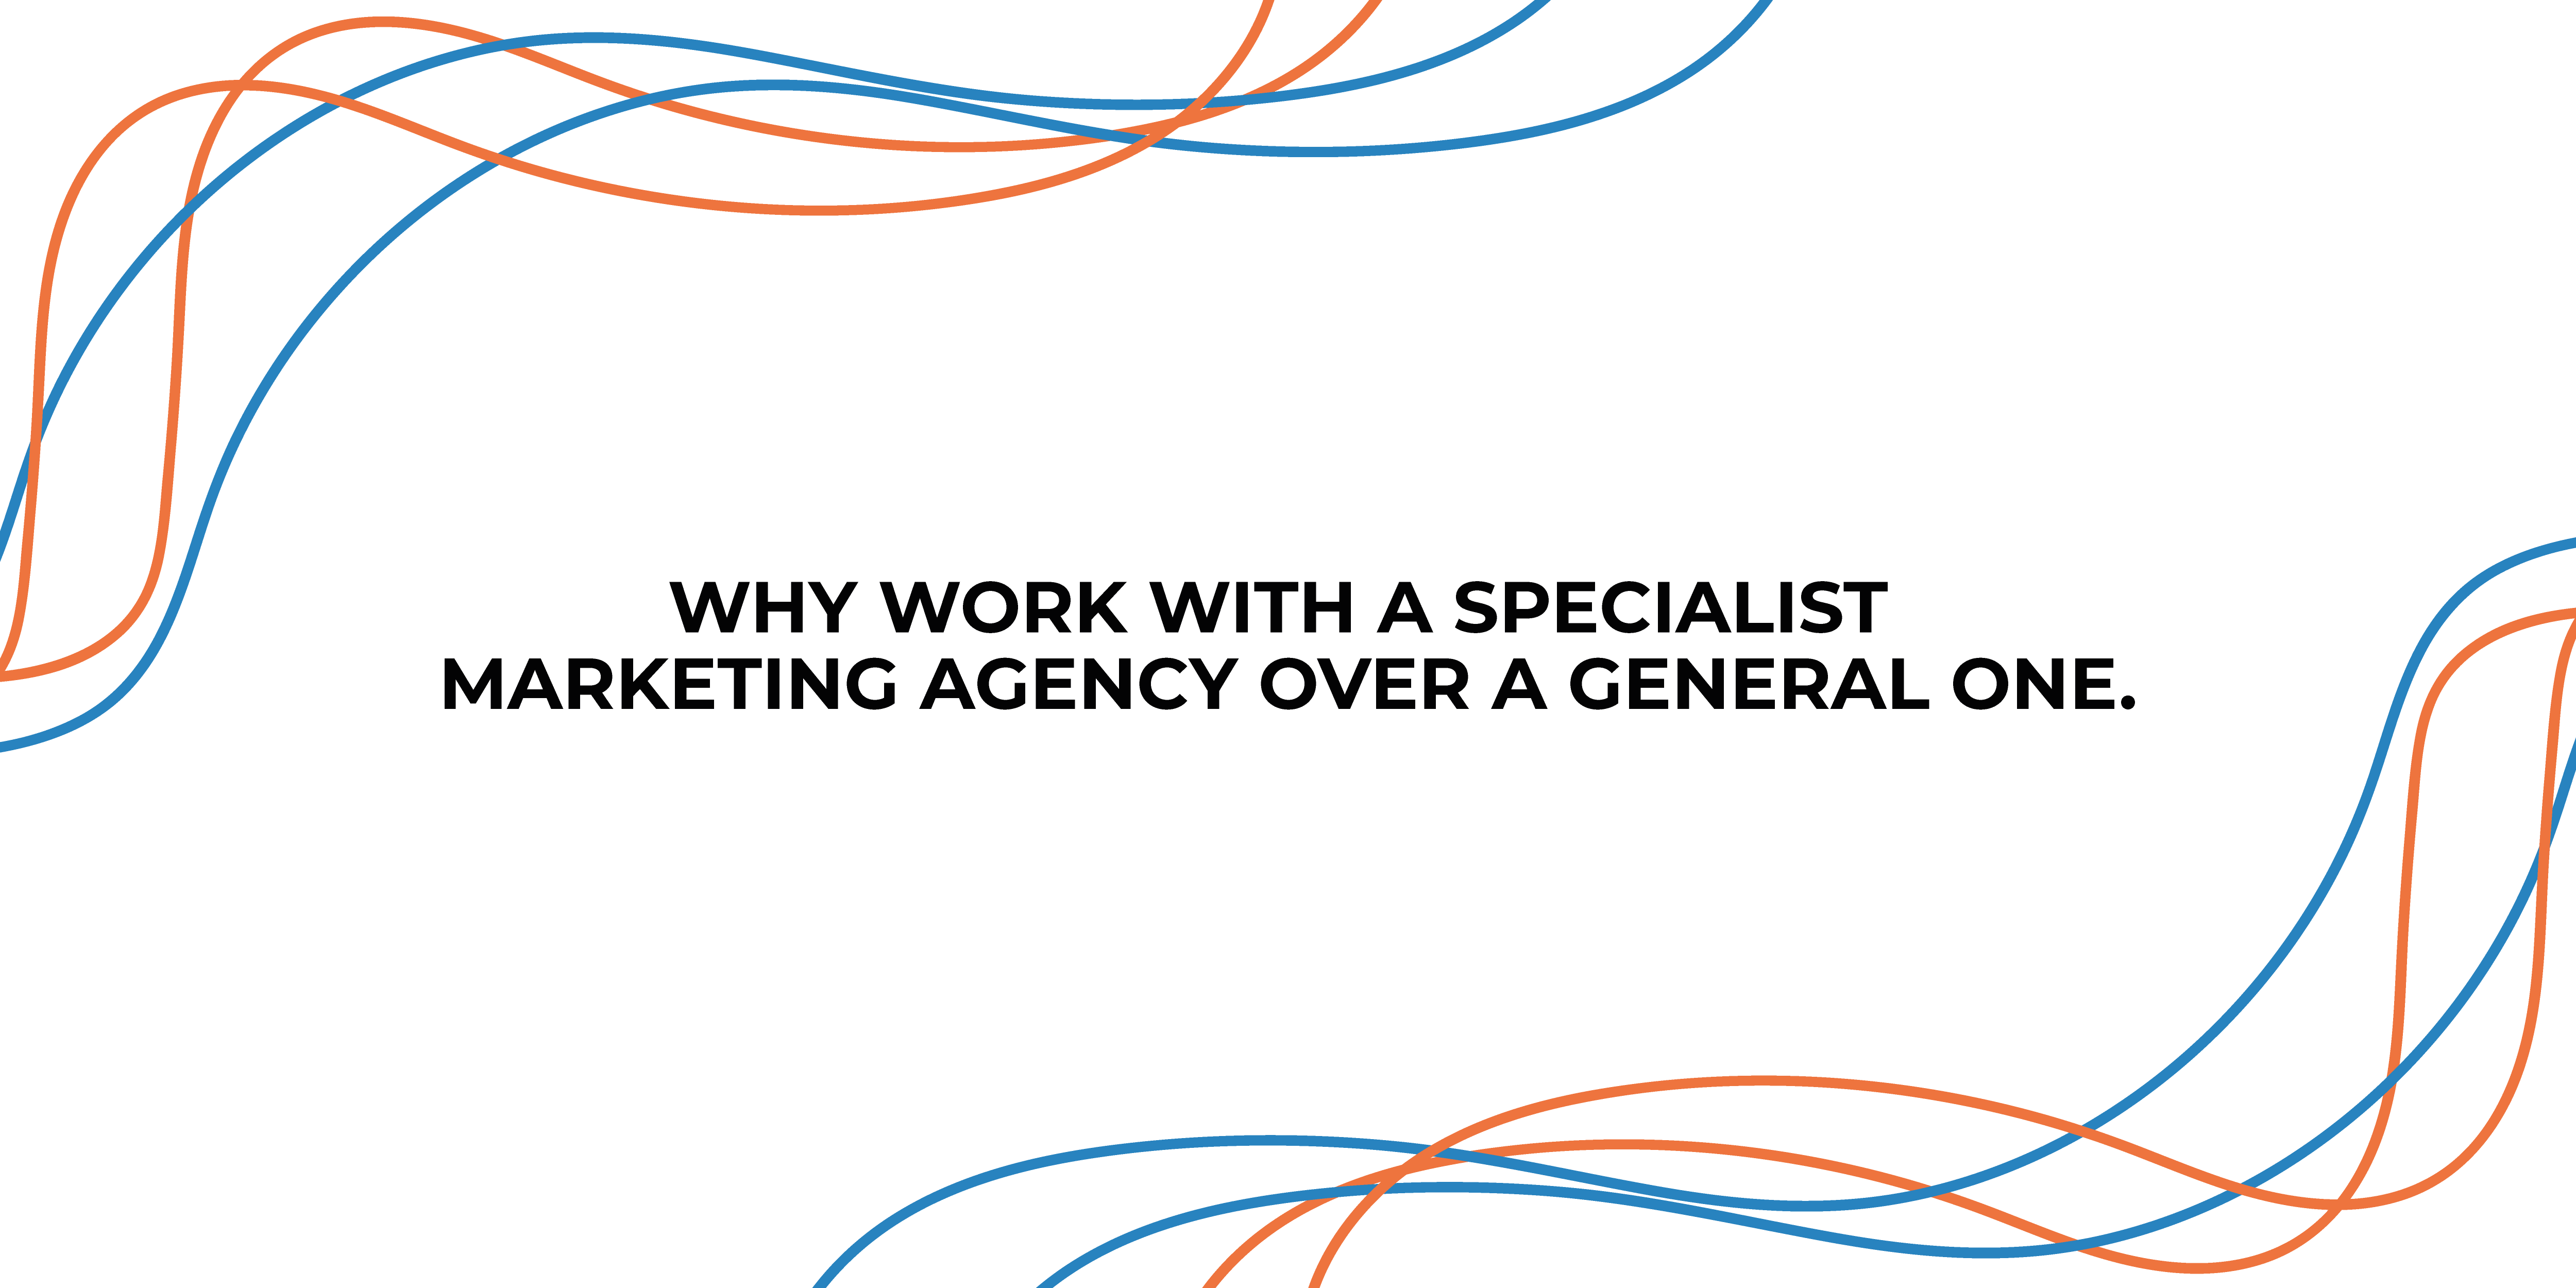 Why work with a specialist marketing agency over a general one.